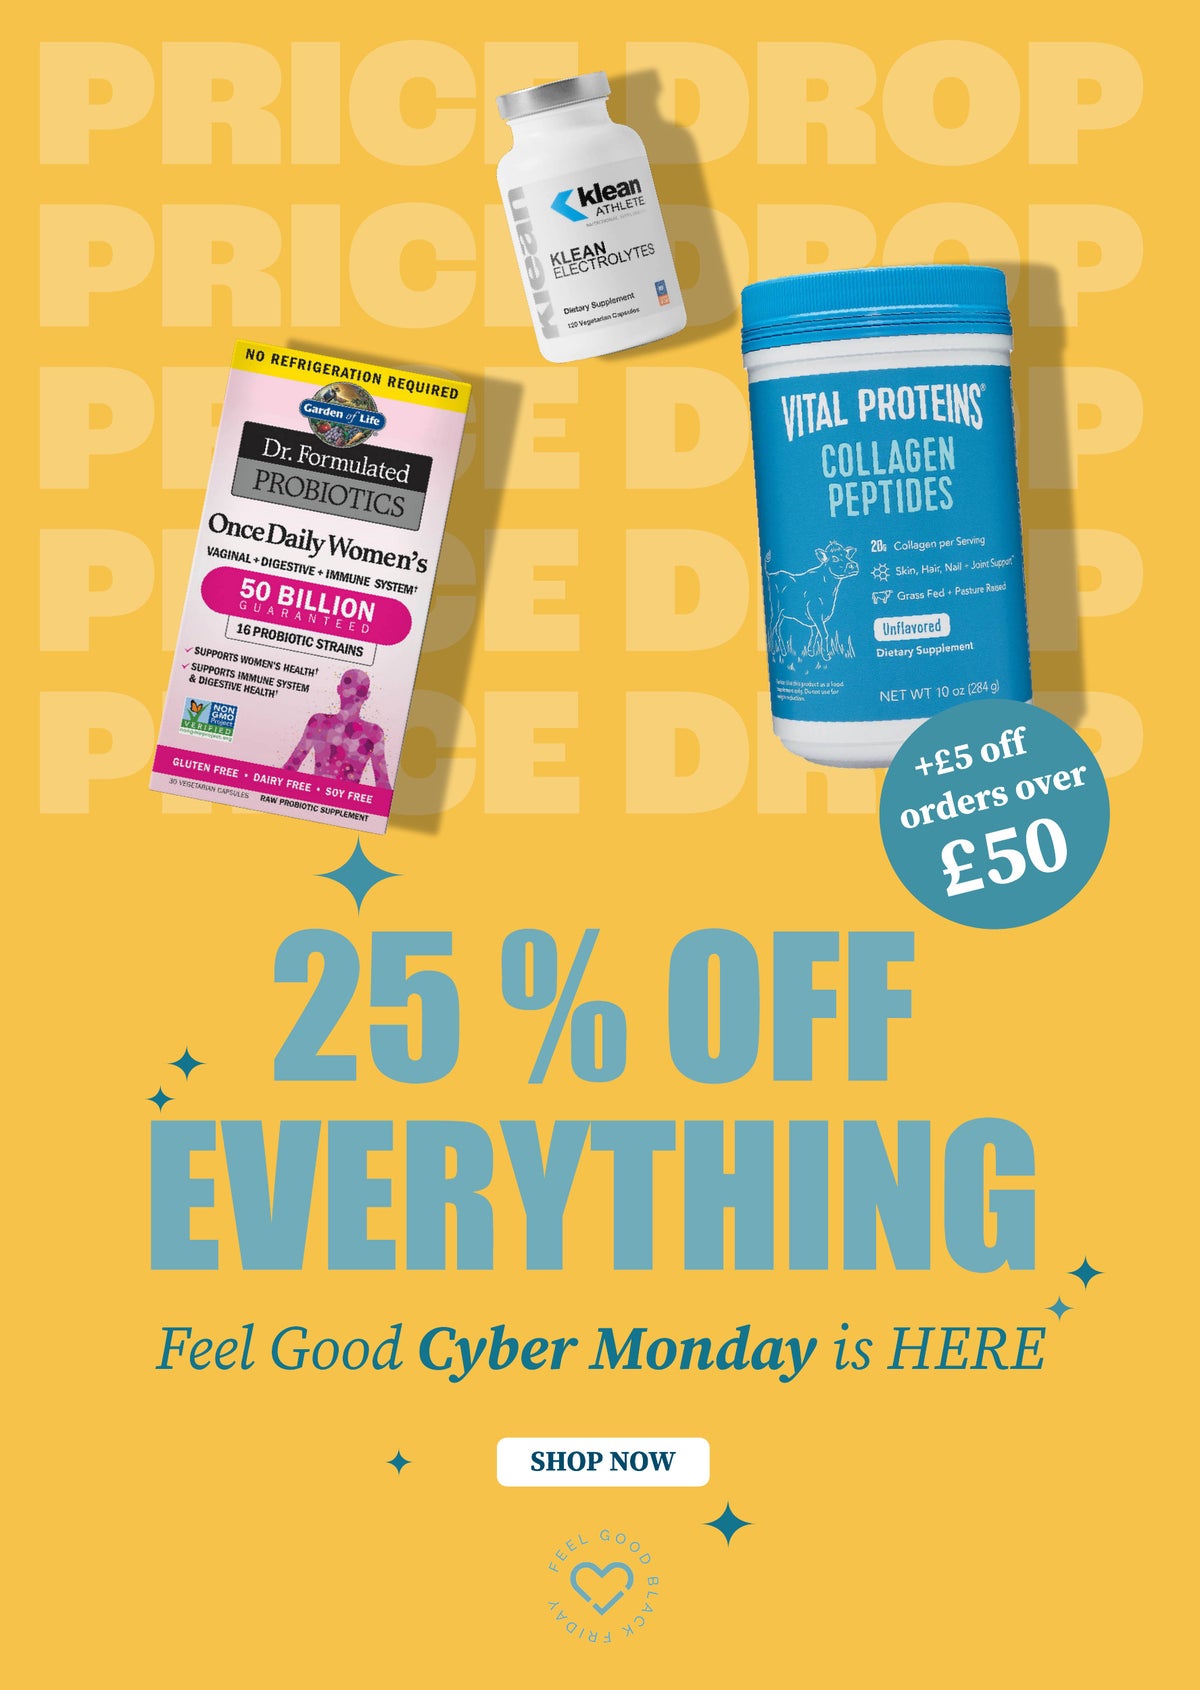 25% OFF EVERYTHING EXTRA £5 OFF ORDERS OVER £60